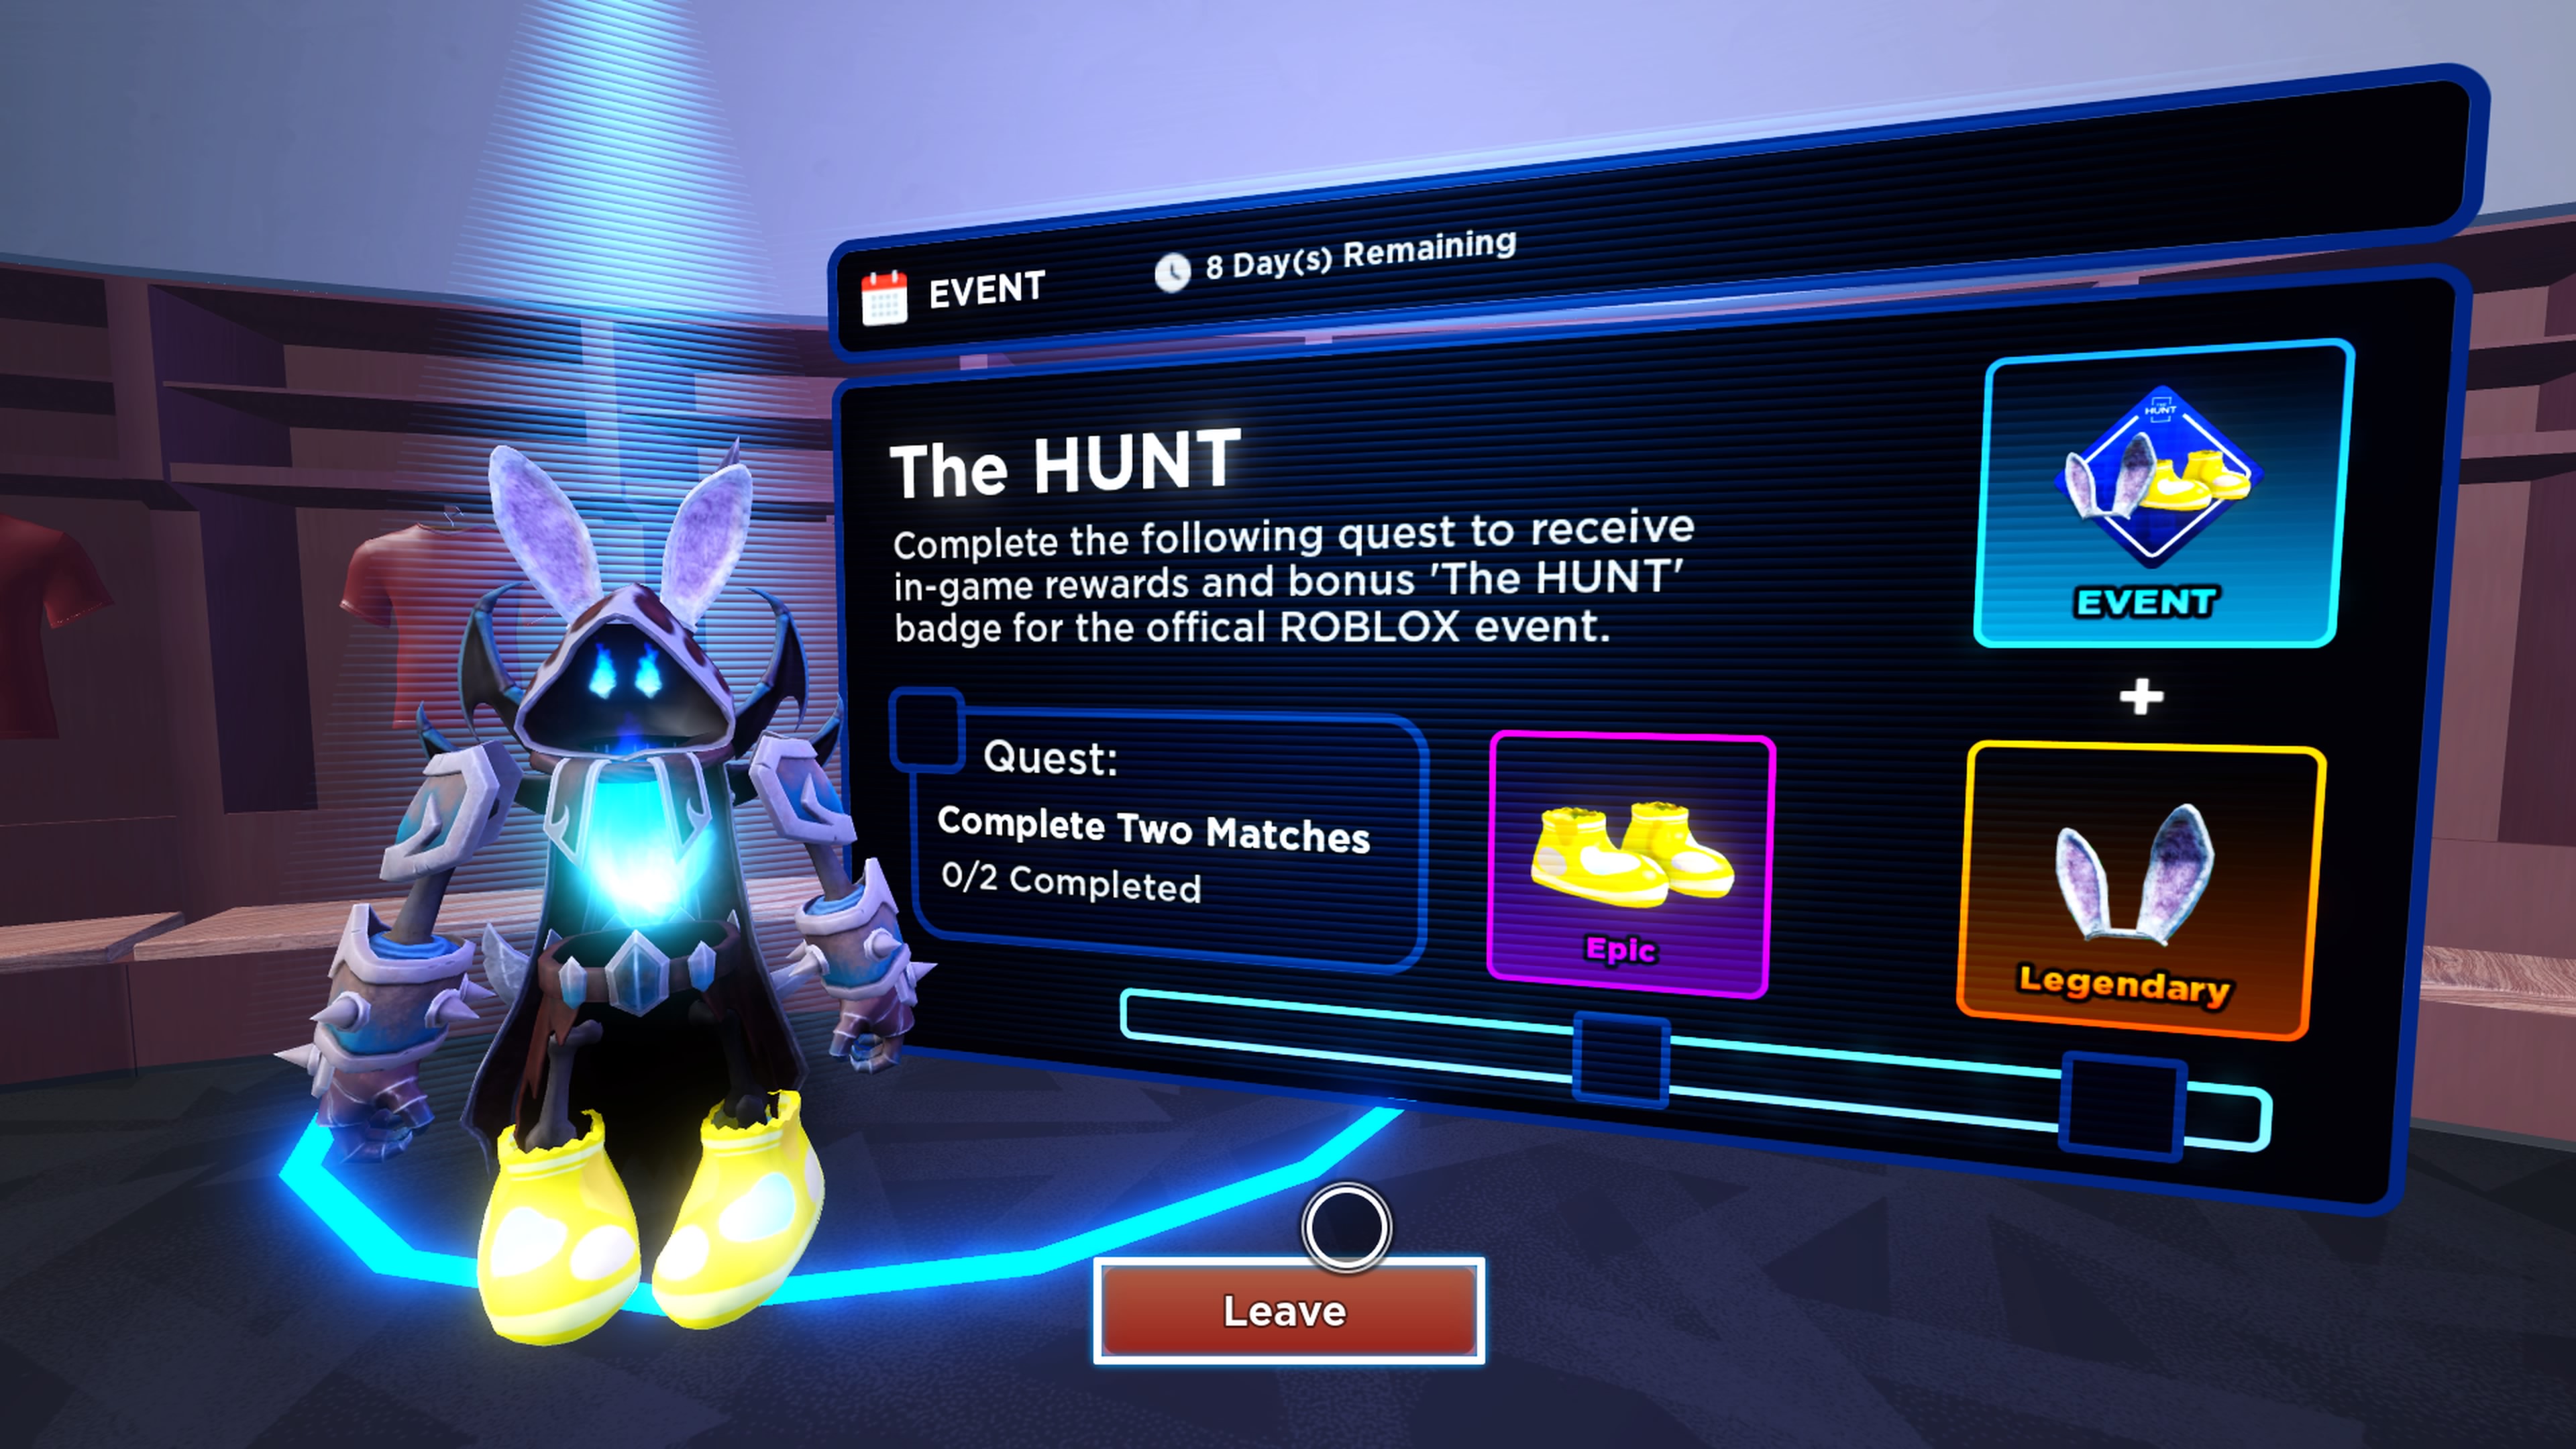 Korblox with bunny ears and big, egg themed shoes. The Board says 'Complete the following quest to receive in-game rewards and bonus 'The Hunt' badge for the official Roblox event.